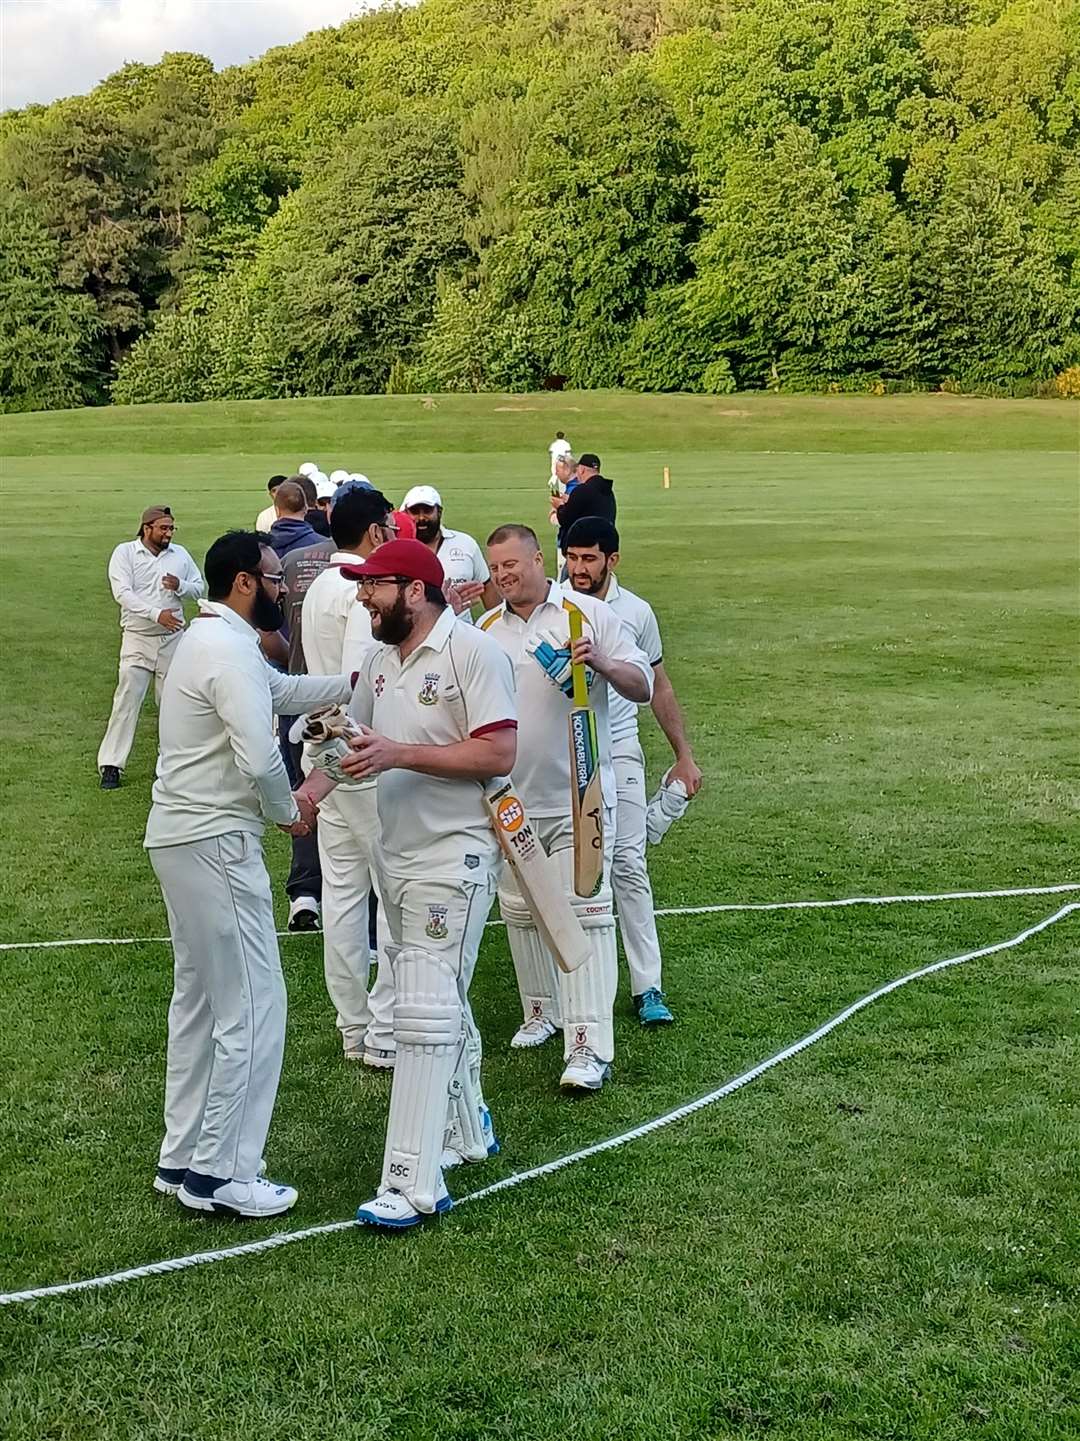 Gus Farr is congratulated on his batting performance.